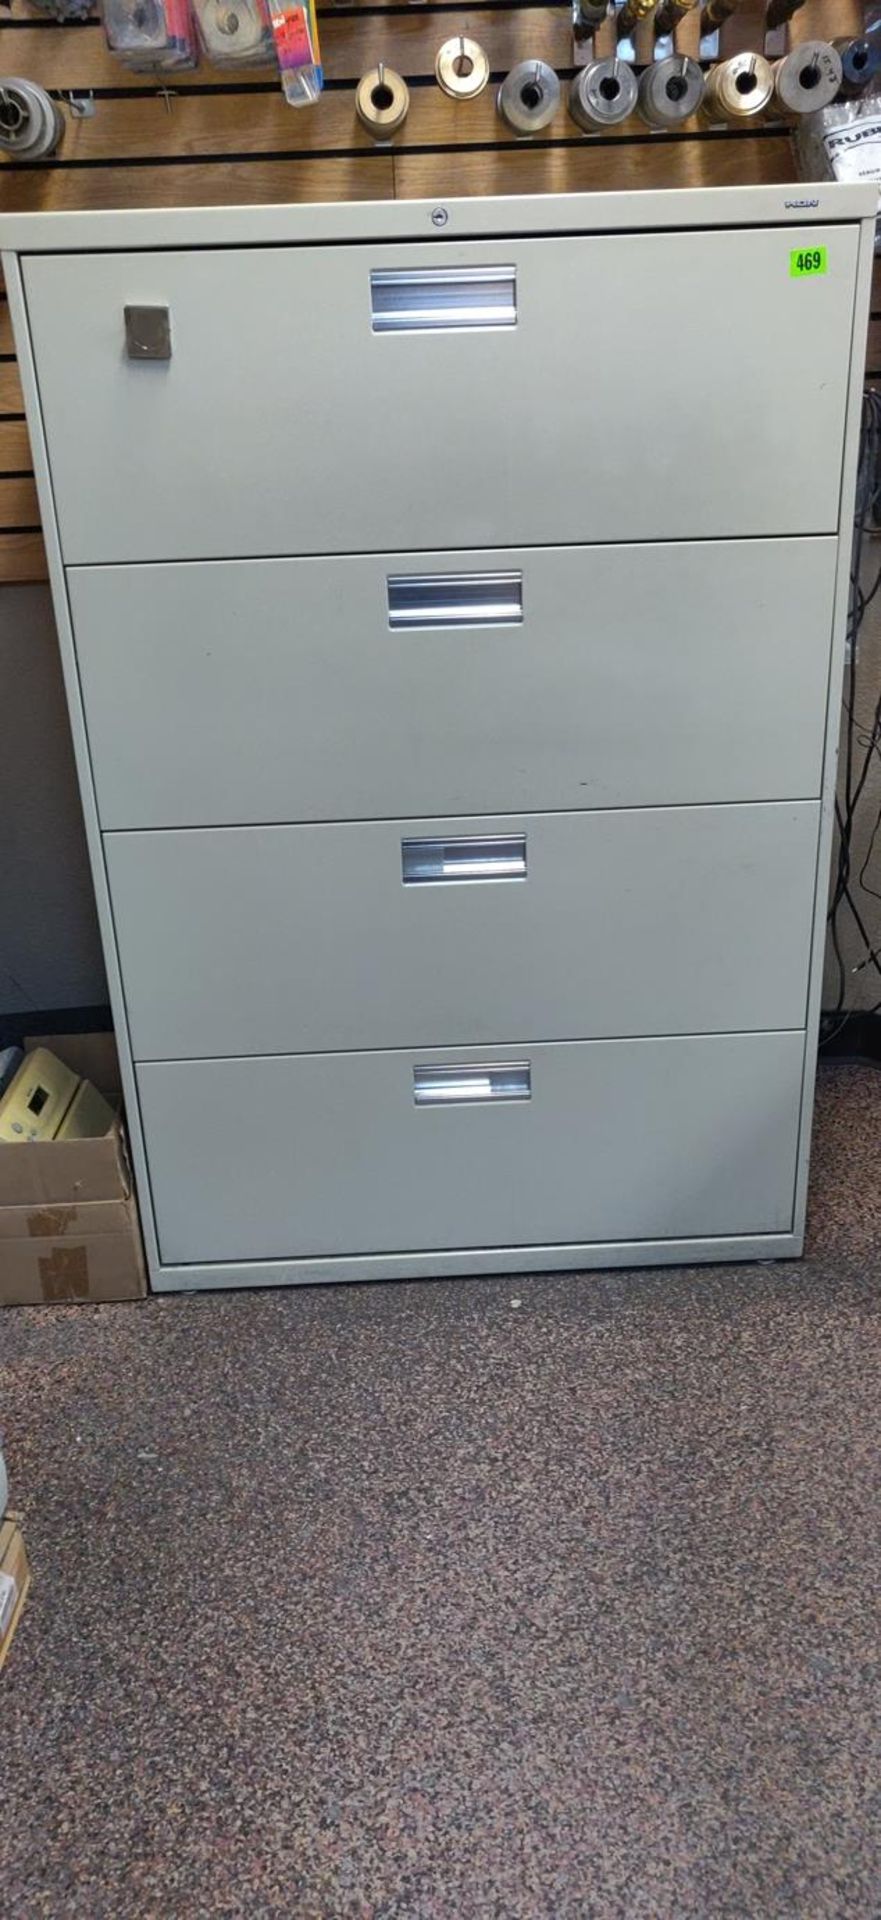 BEIGE 4 DRAWER CABINET 4 FT TALL - COMES WITH SOME MISC OFFICE SUPPLIES